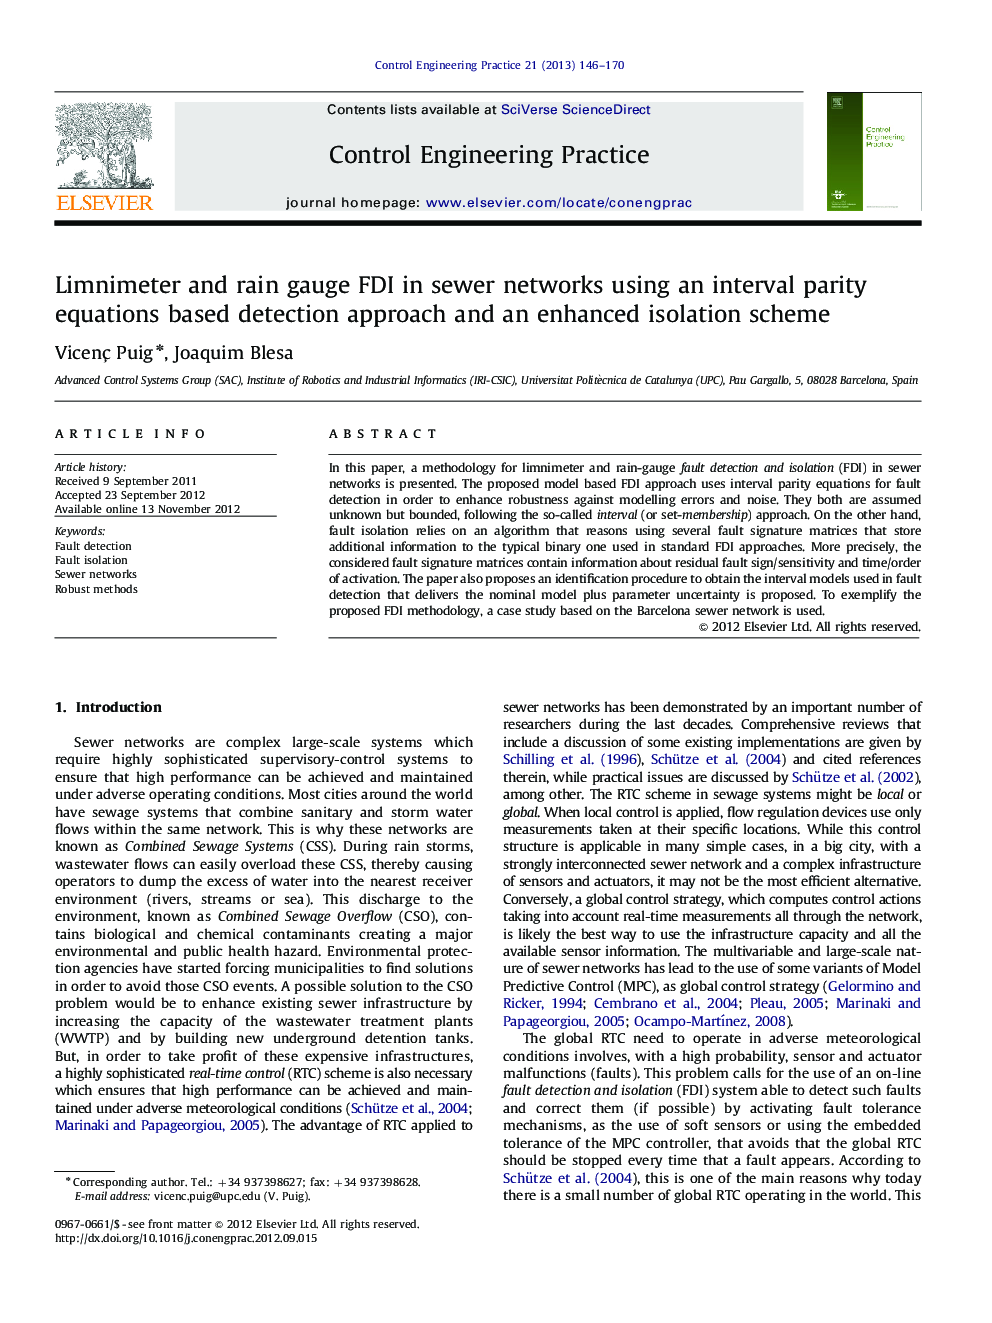 Limnimeter and rain gauge FDI in sewer networks using an interval parity equations based detection approach and an enhanced isolation scheme